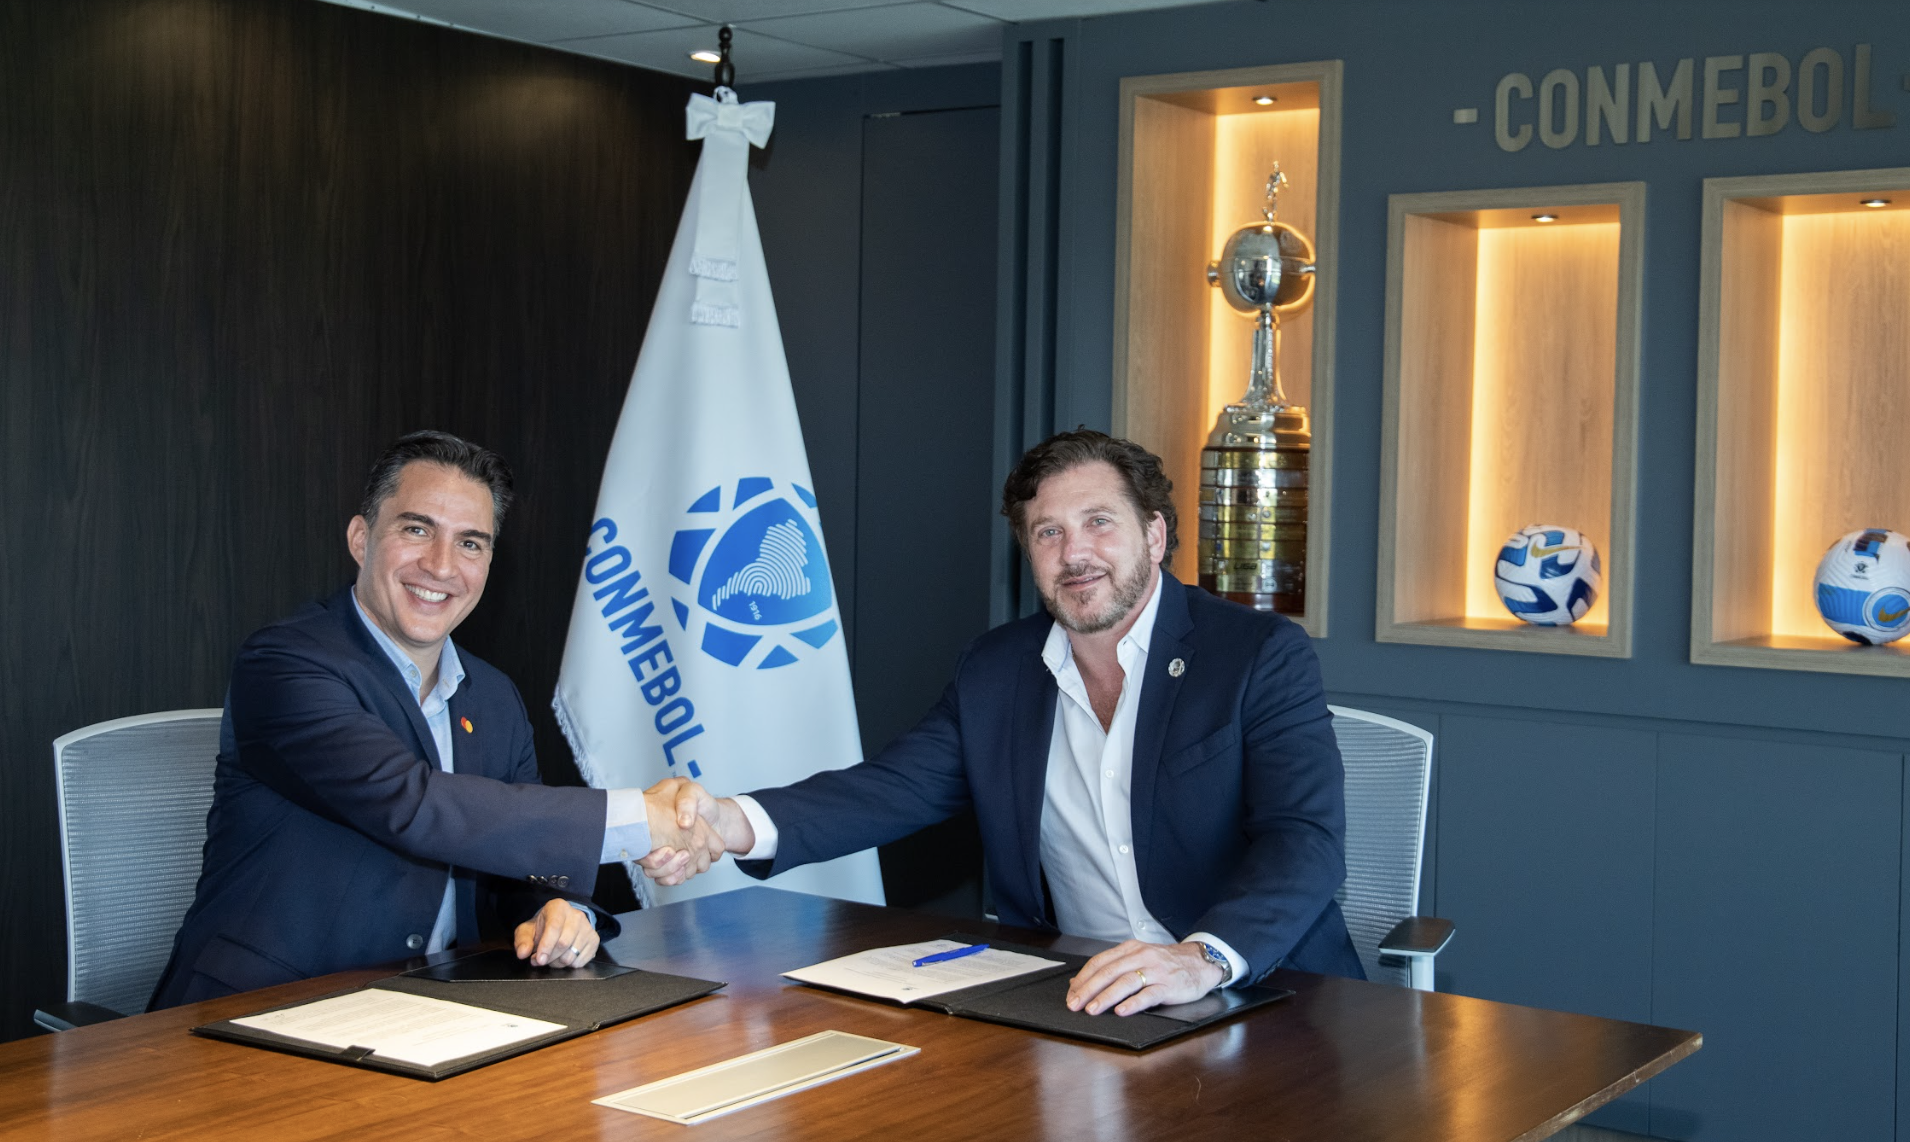 Roberto Ramírez Laverde, Senior Vice President of Marketing and Communications for Latin America and the Caribbean and Alejandro Domínguez, President of CONMEBOL at the renewal of Mastercard's sponsorship contract with CONMEBOL Libertadores and CONMEBOL Libertadores Femenina.